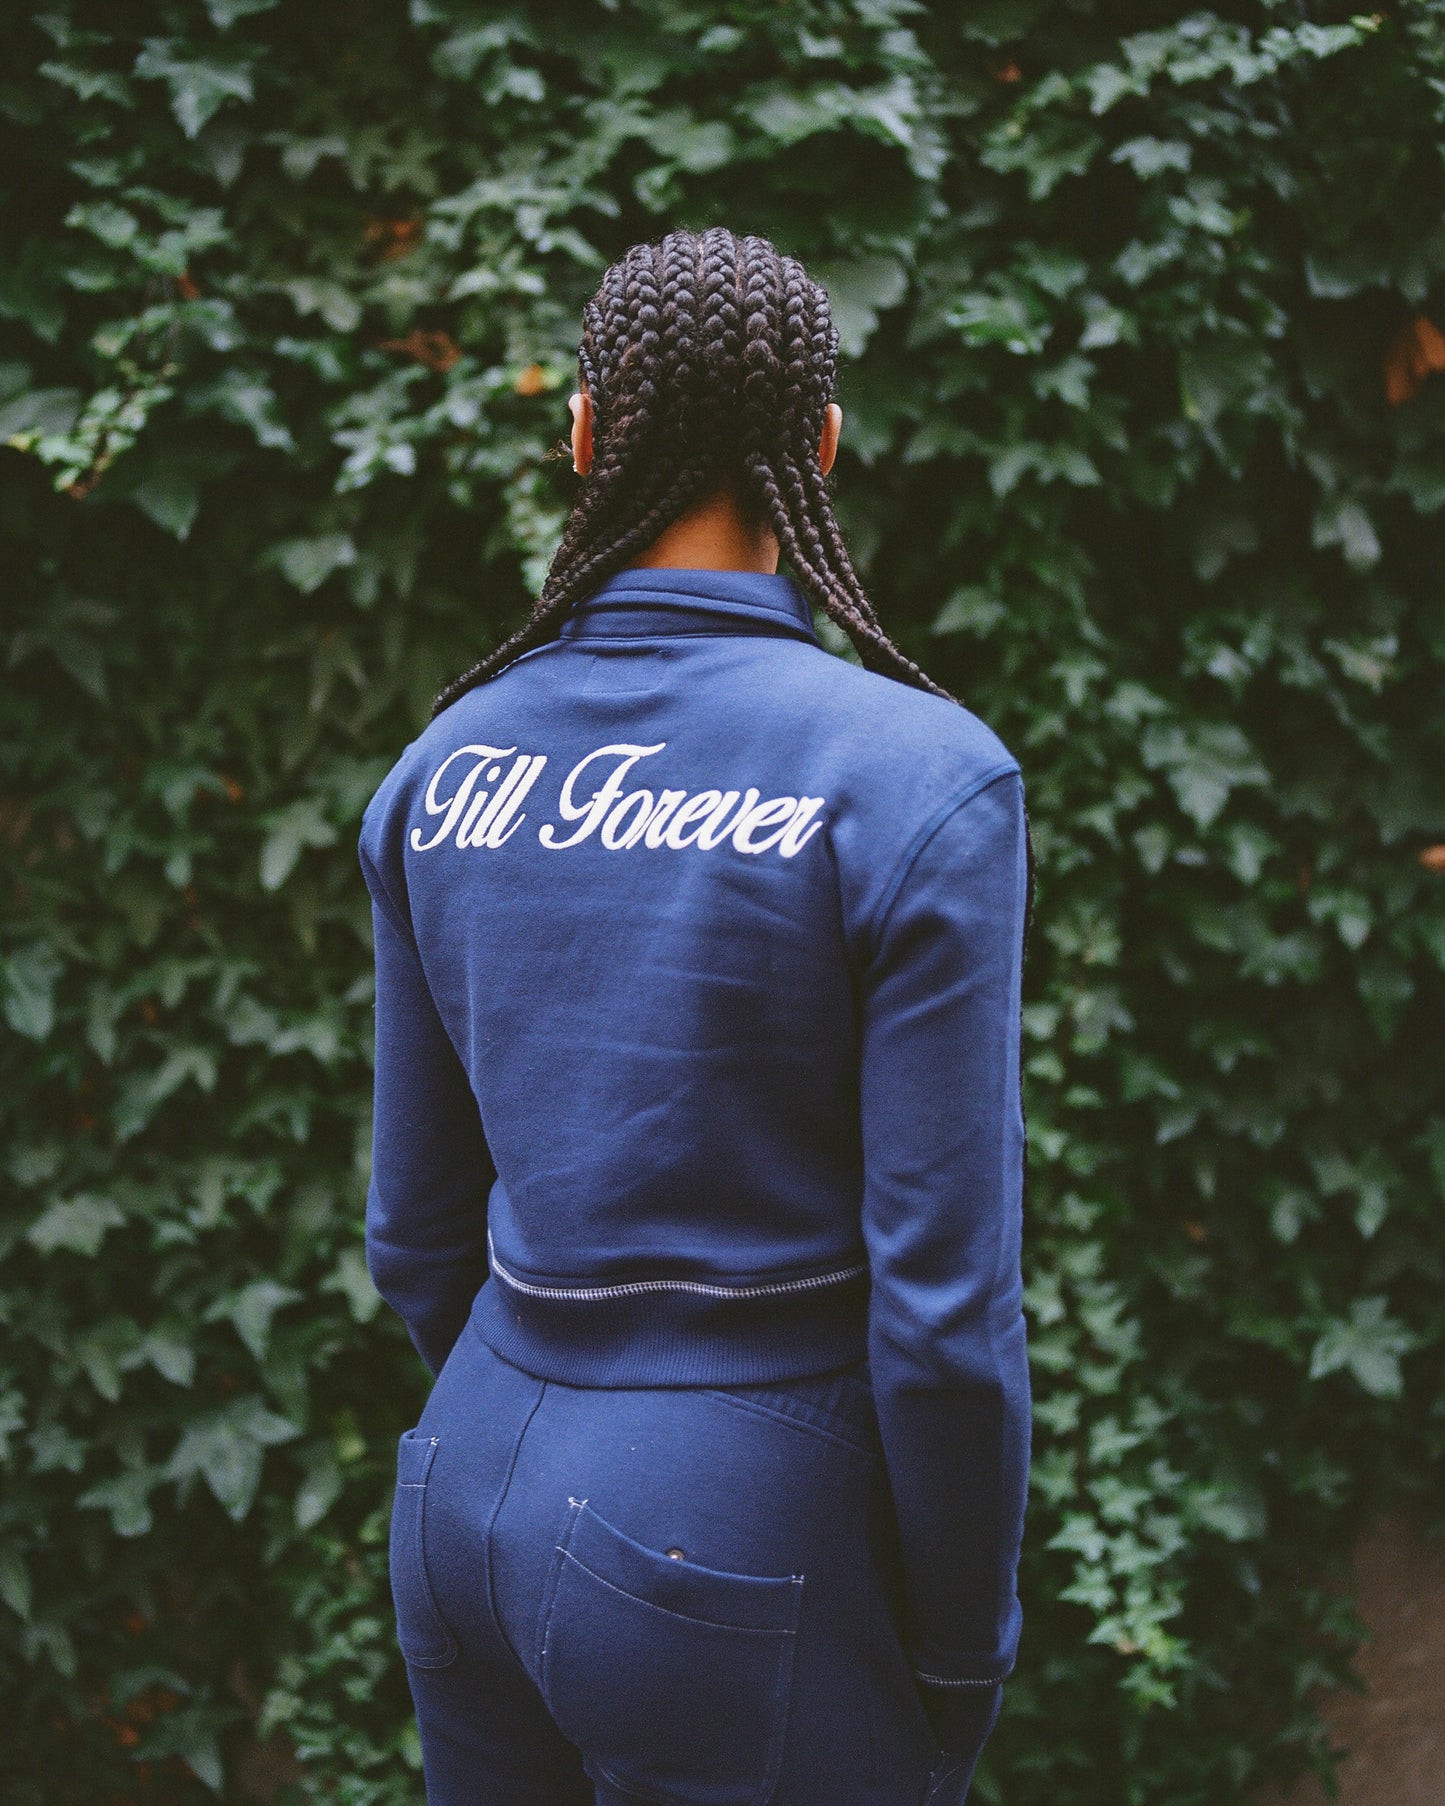 *SALE* TILL FOREVER CROPPED TRACK JACKET (MIDNIGHT NAVY)